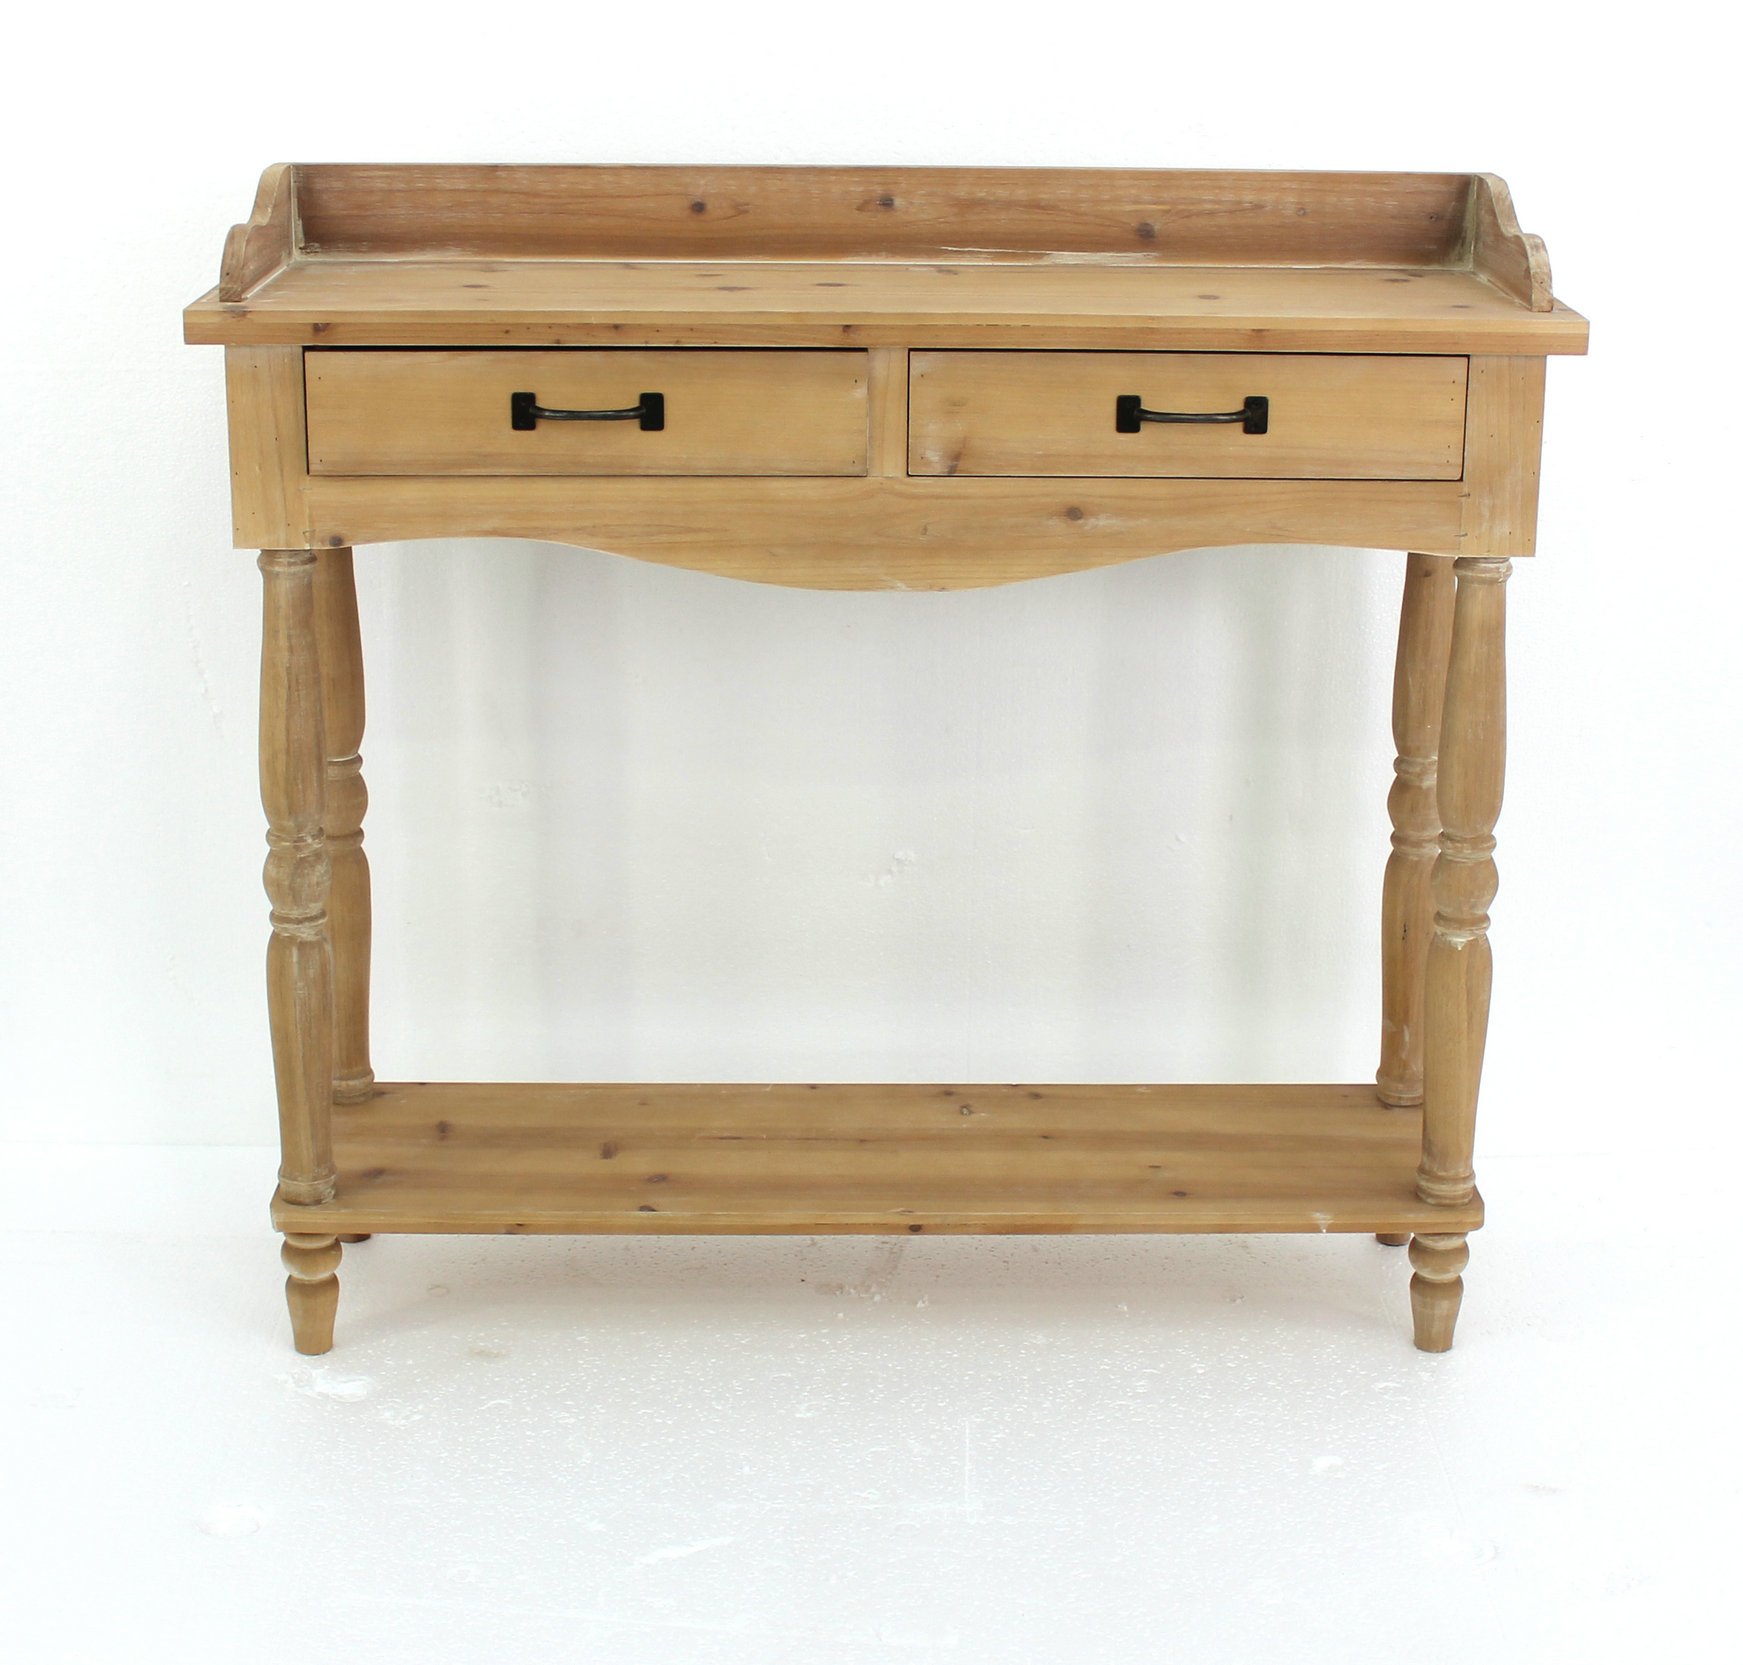 11.75" x 42" x 38.5" Natural, 2 Drawer, Rustic, Unfinished Dressing - End Table